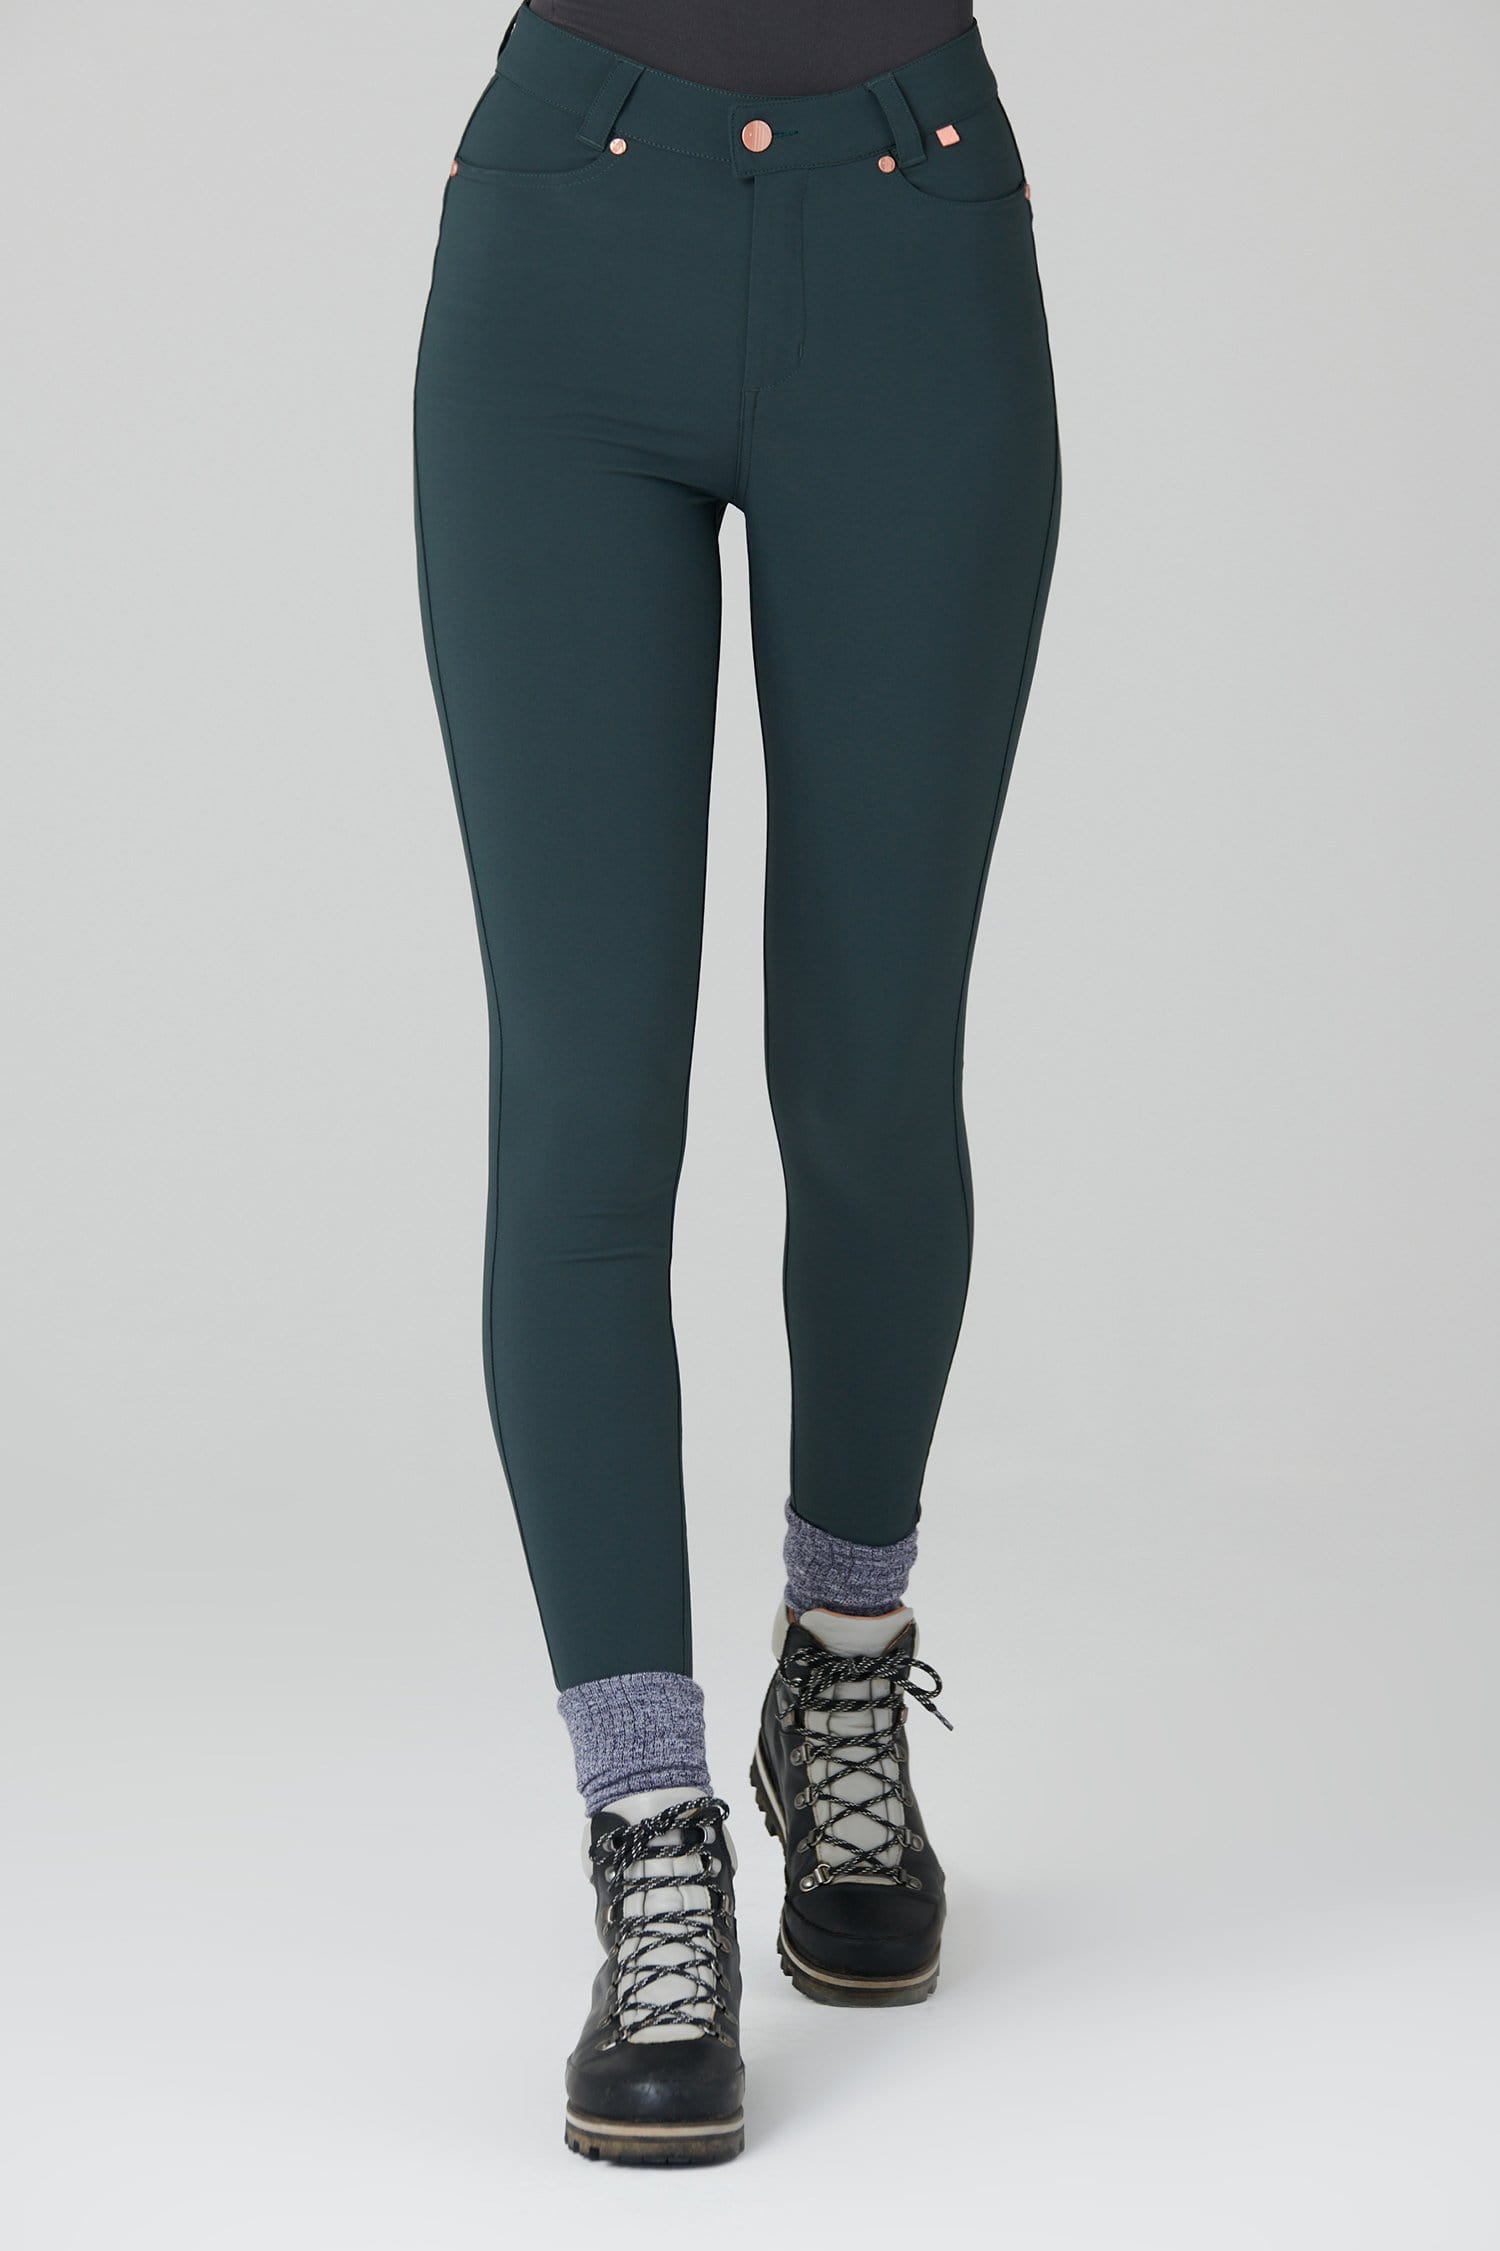 Thermal Skinny Outdoor Trousers - Forest Green - 30xl / Uk12 - Womens - Acai Outdoorwear